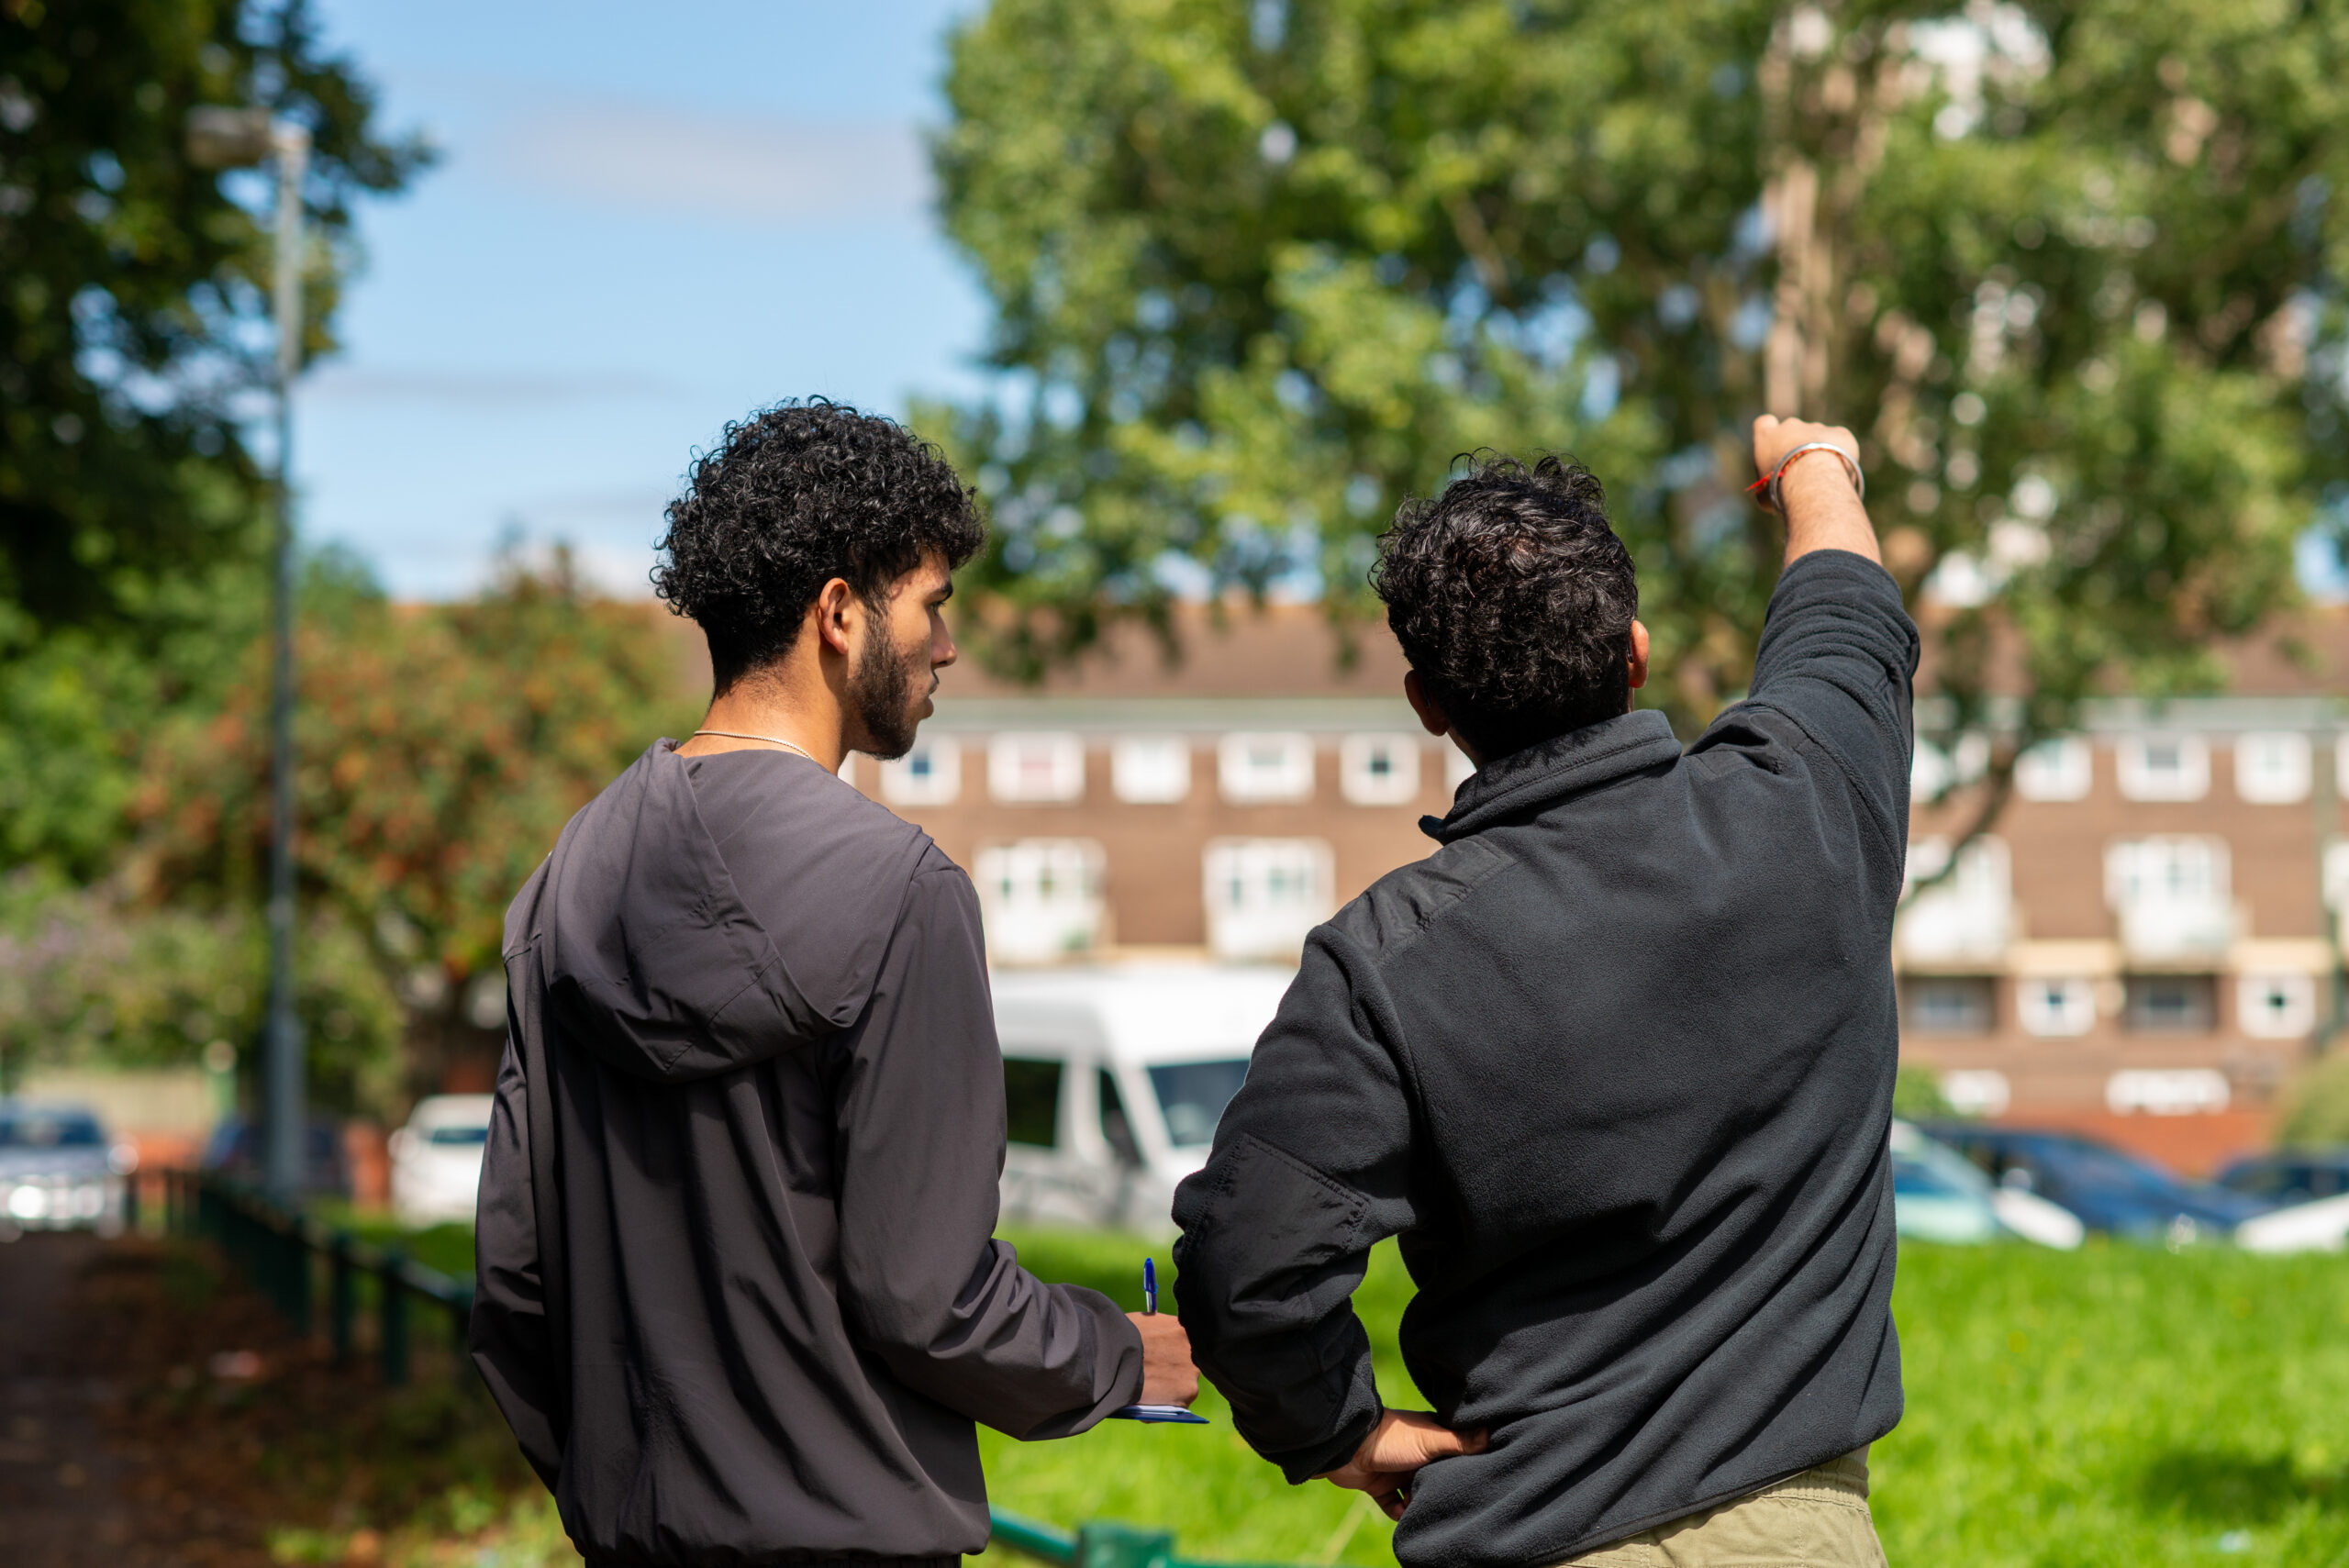 Krish and Raghav Kumar, BTP volunteers, professionally photographed by Phil Formby for WT's Tree Equity.